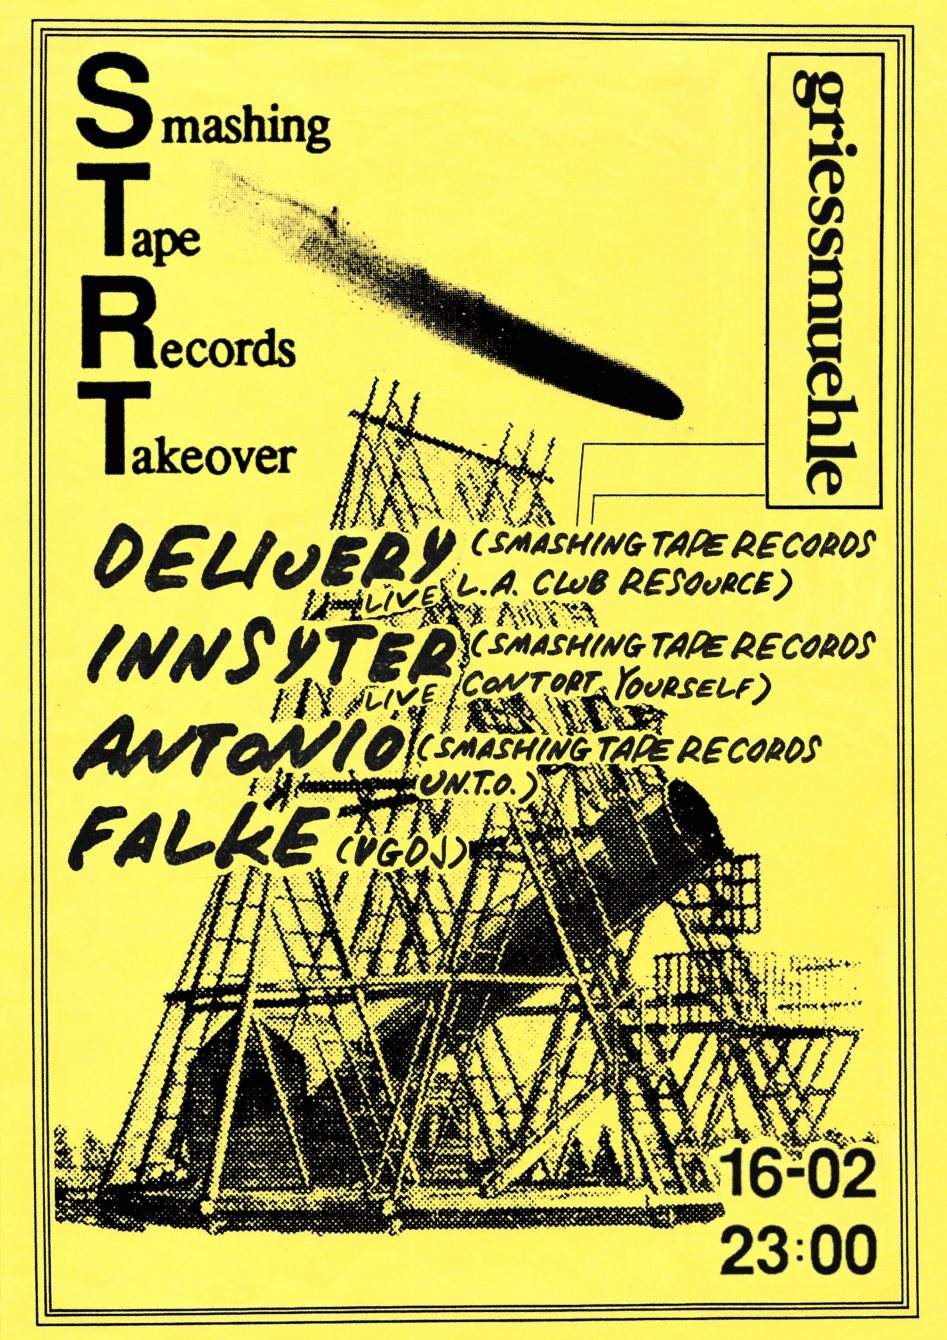 Smashing Tape Records Takeover - フライヤー表